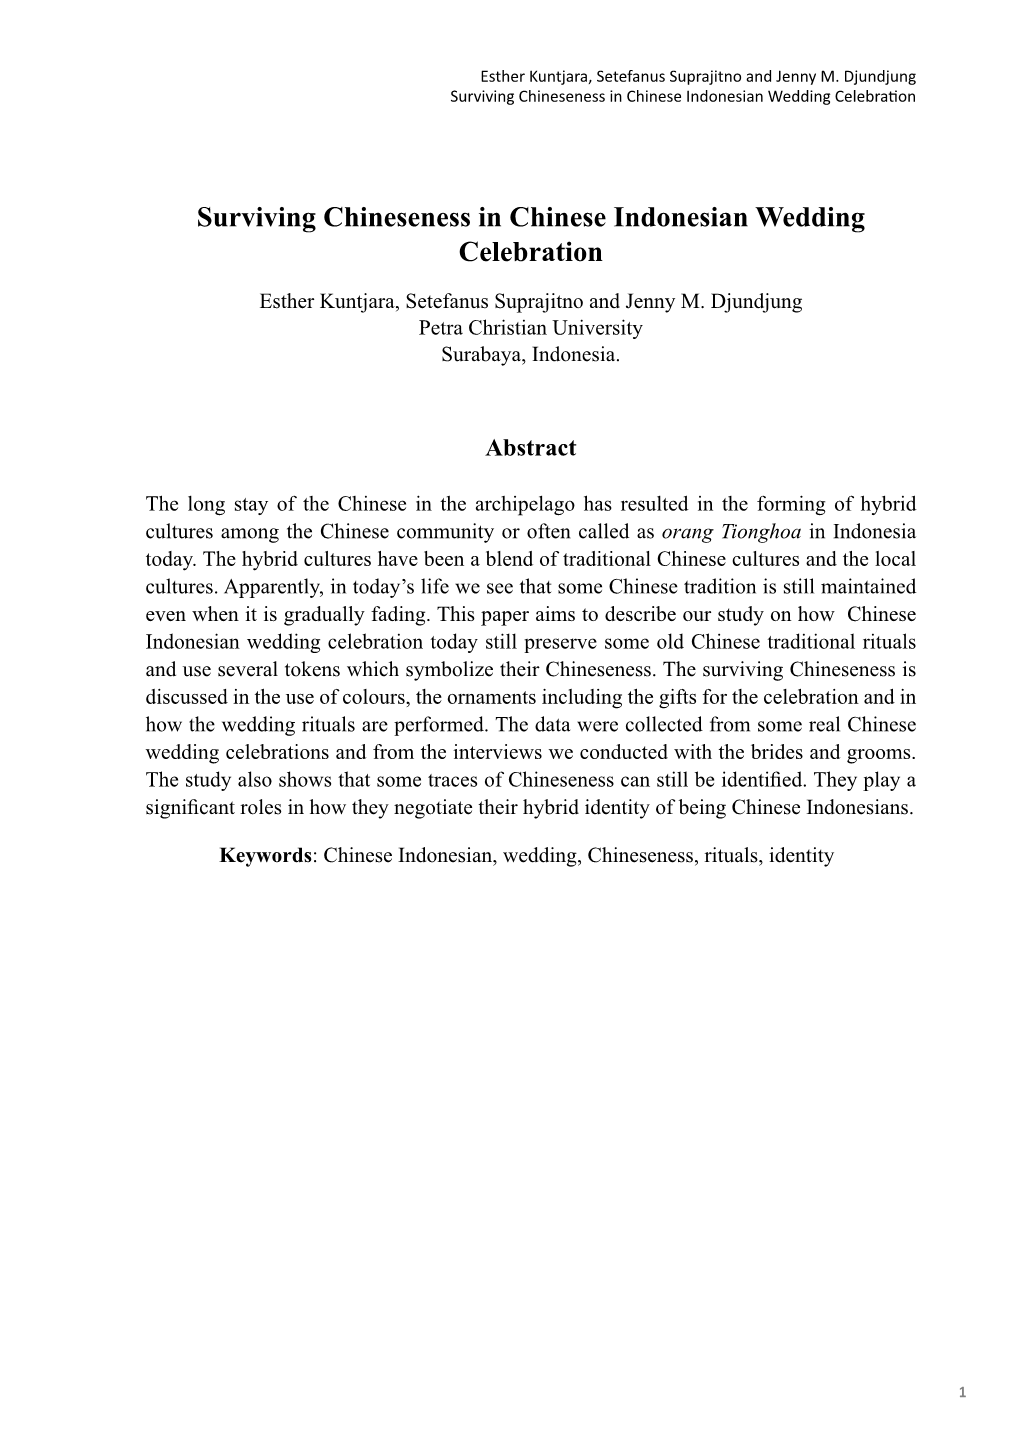 Surviving Chineseness in Chinese Indonesian Wedding Celebration